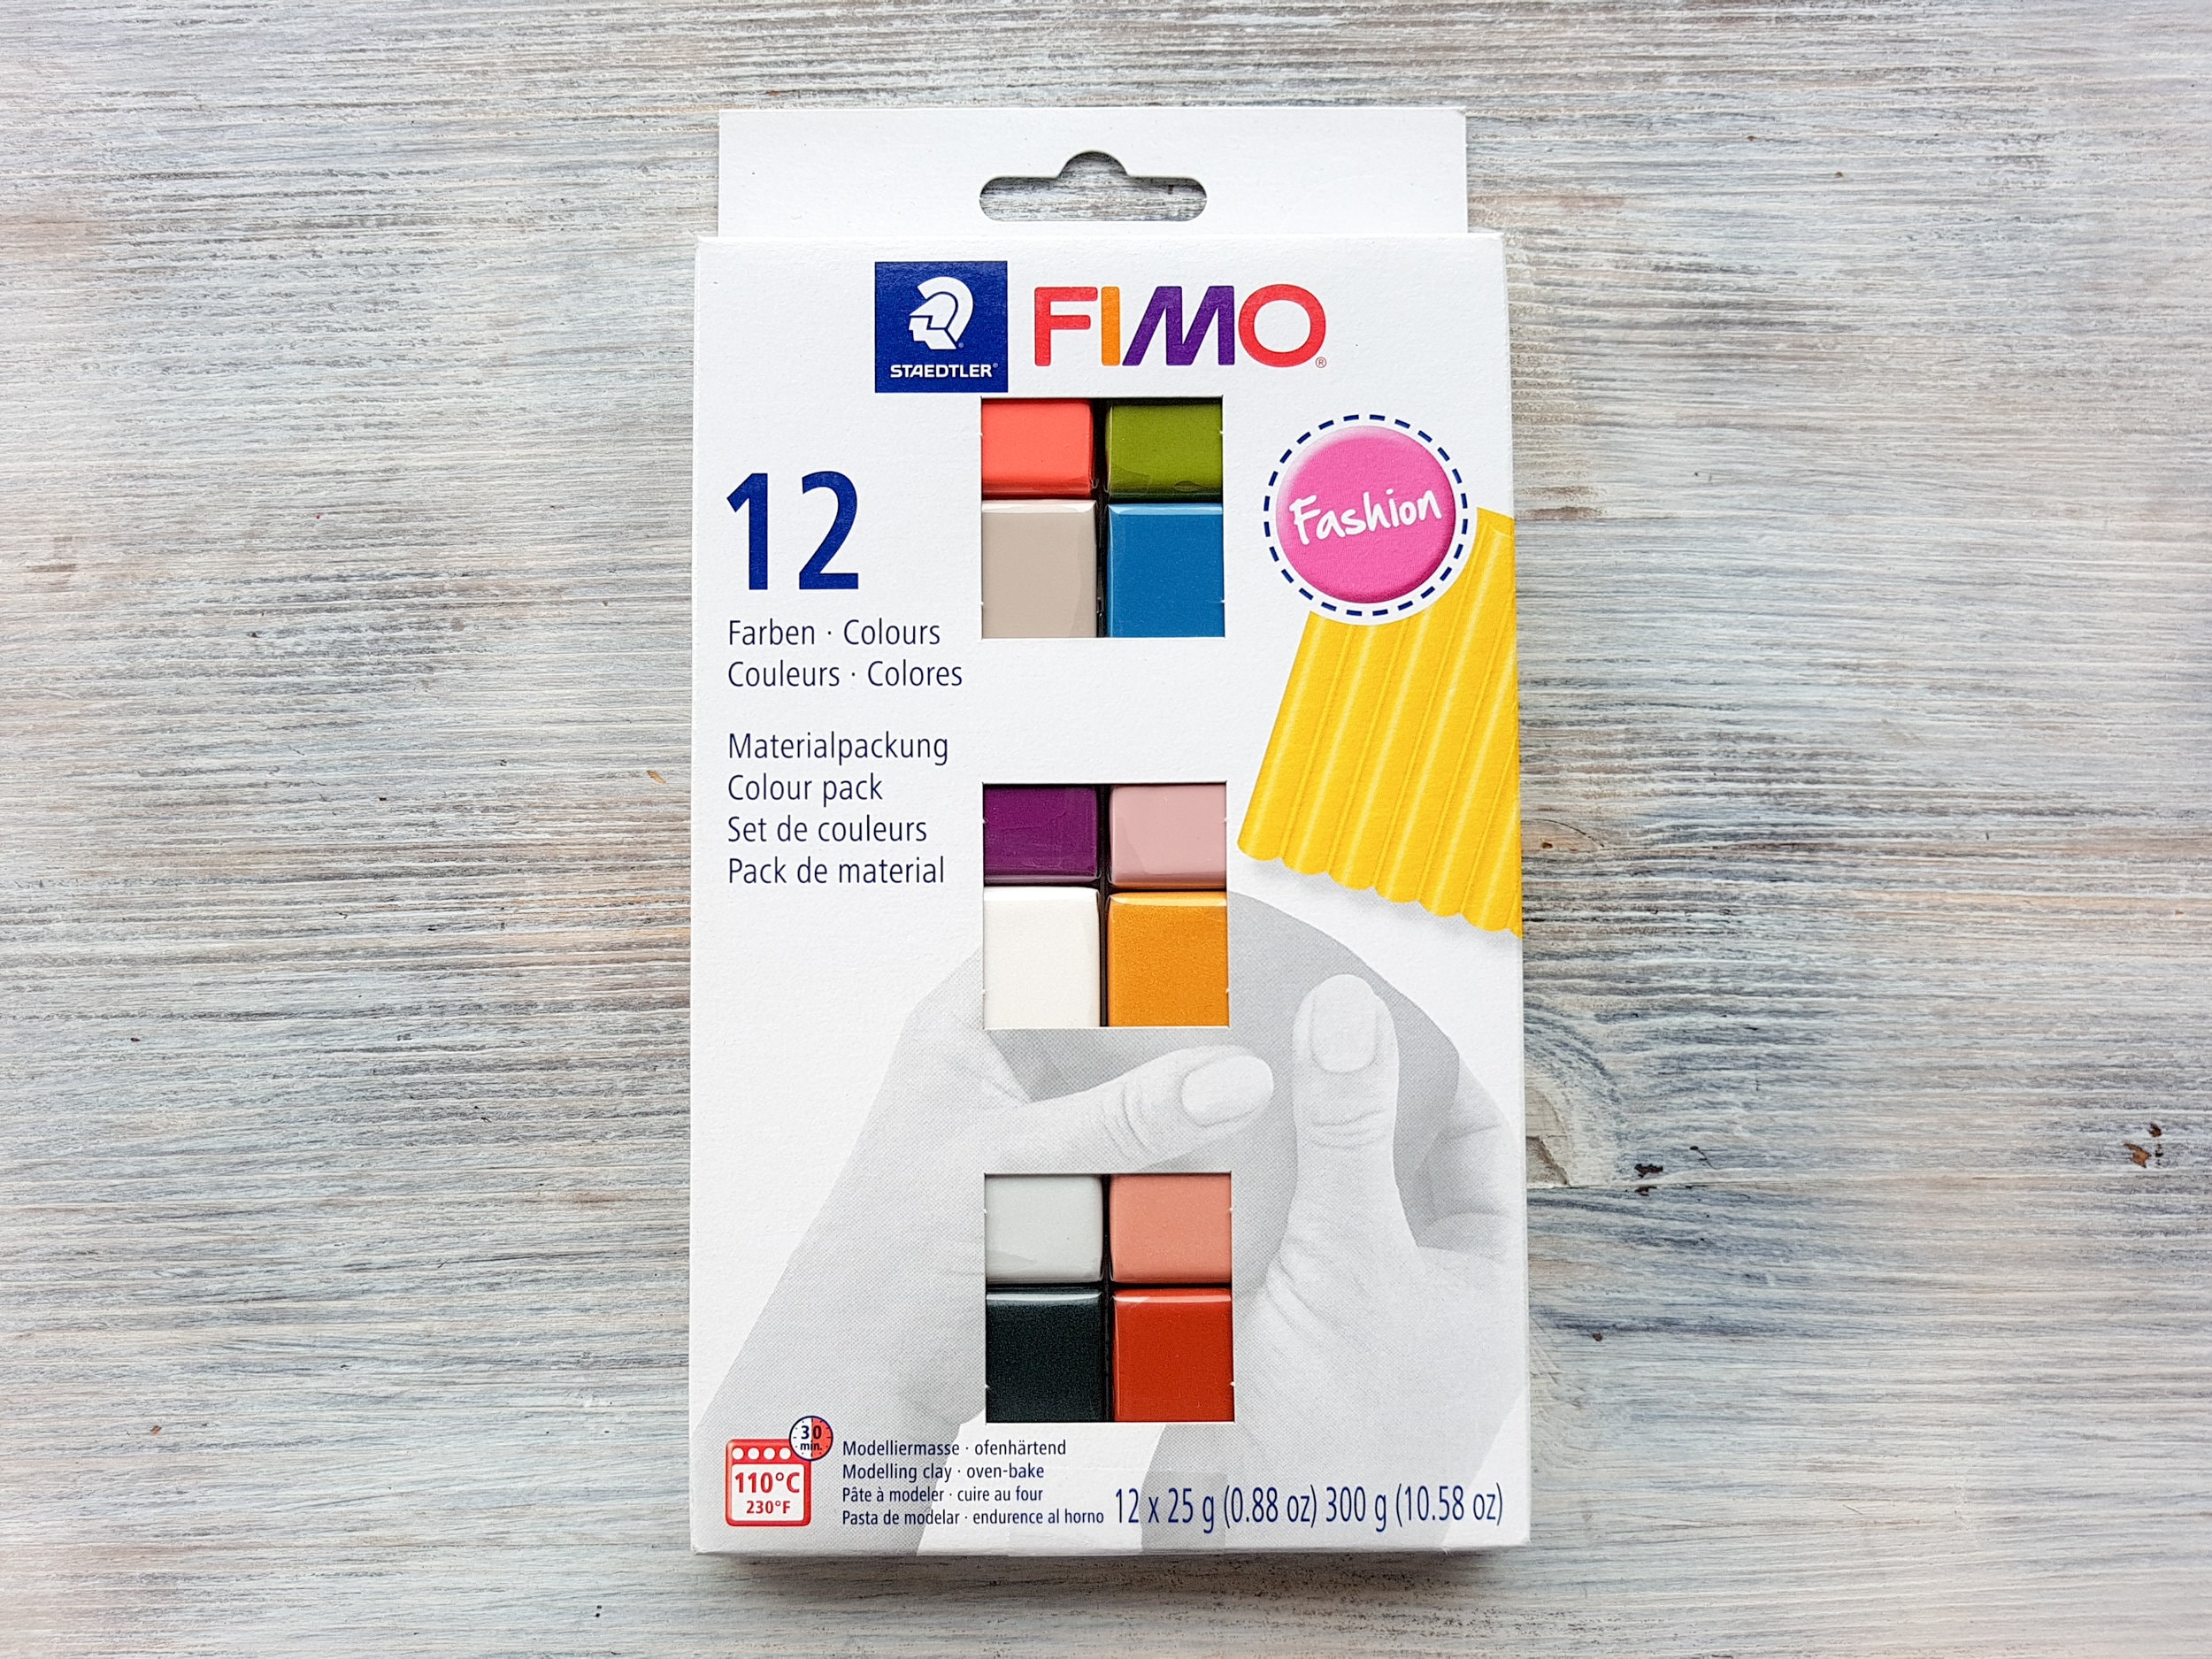 Fimo Soft Polymer Oven Modelling Clay - 57g - Set of 8 - Rainbow Colours